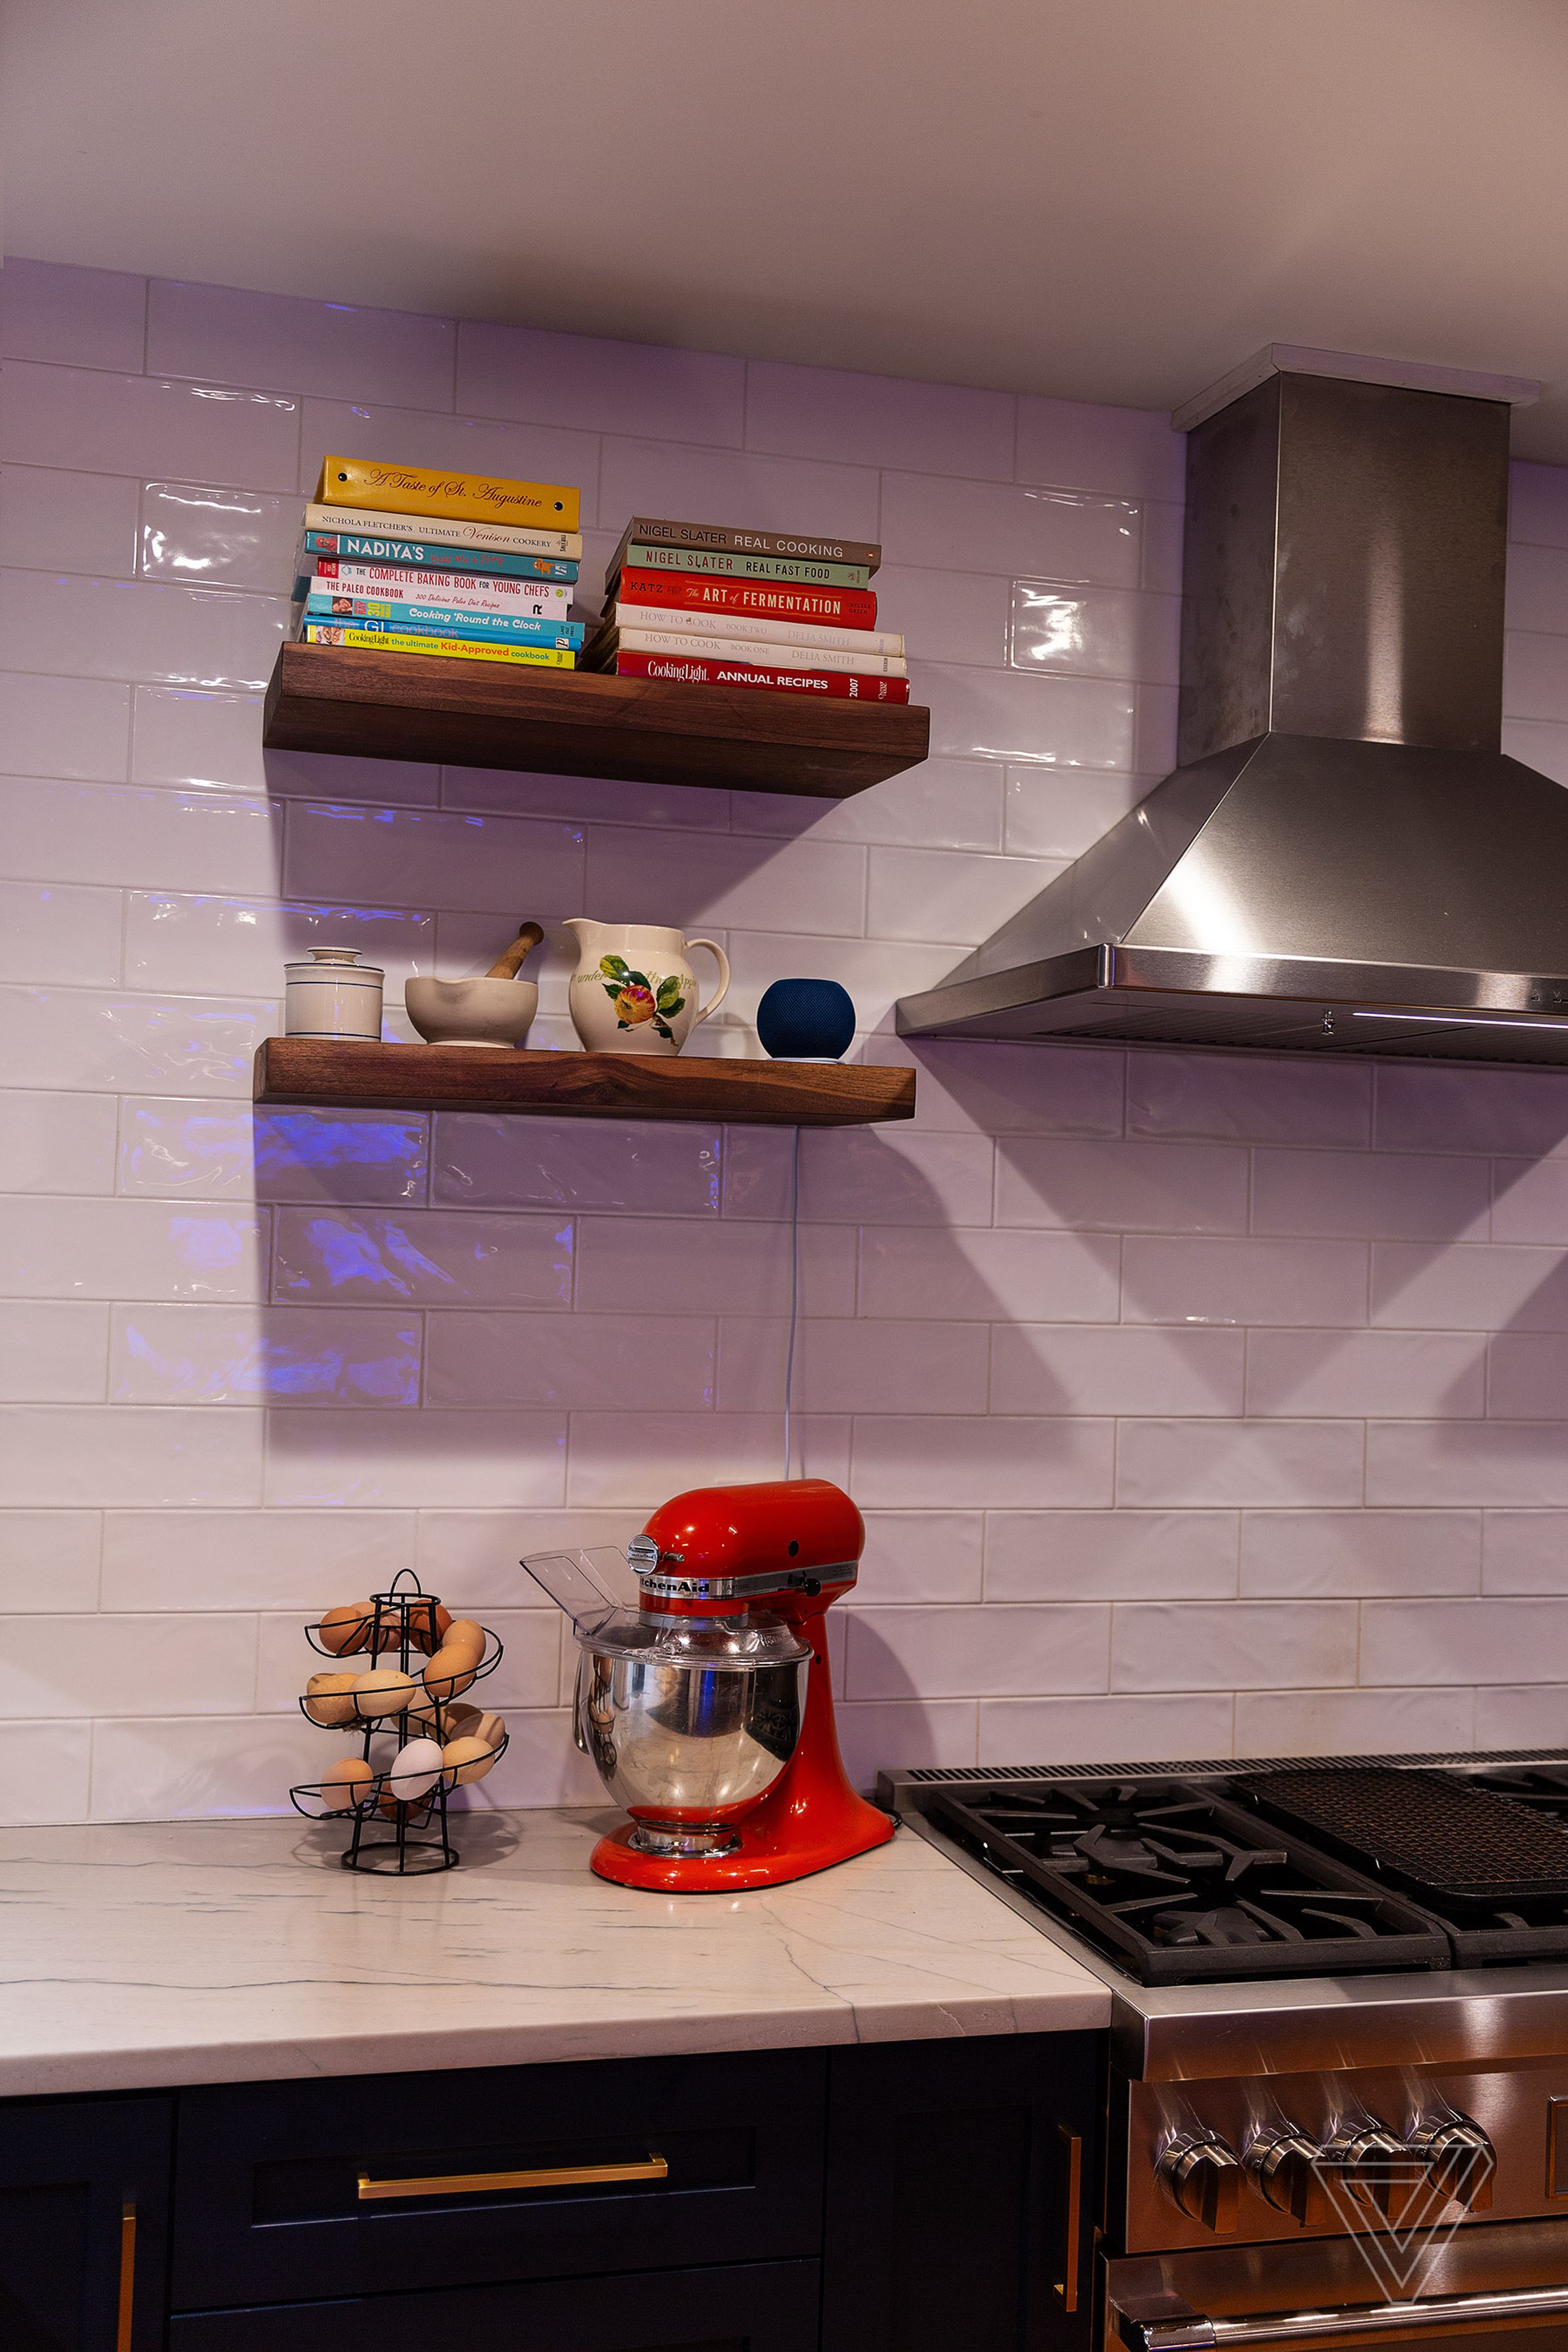 The blue HomePod Mini is a perfect match in my kitchen.